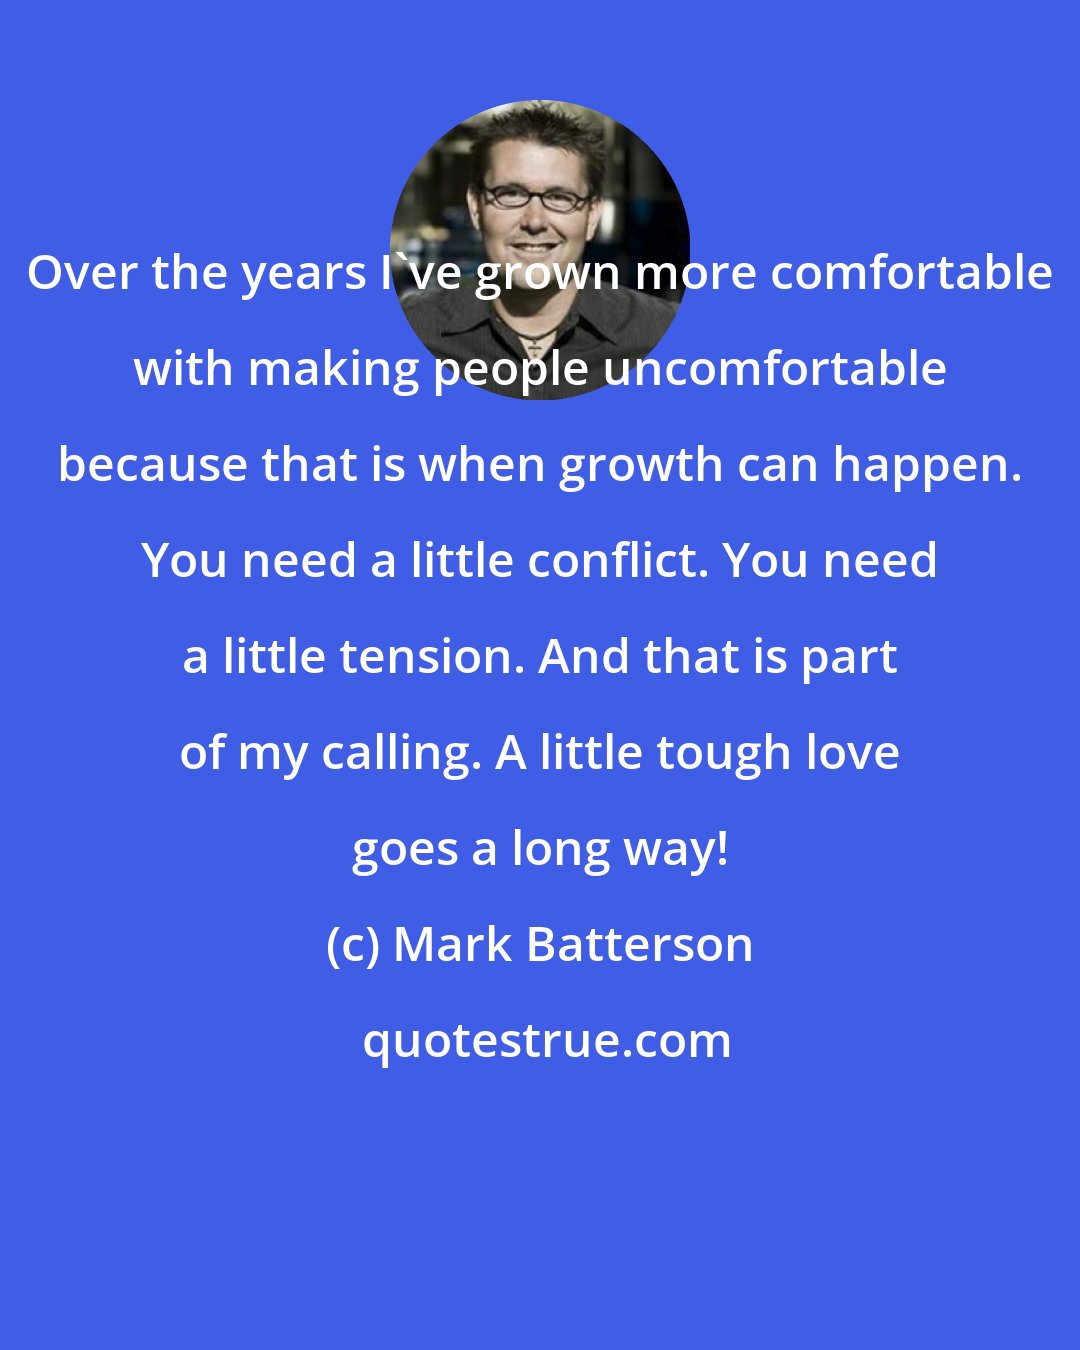 Mark Batterson: Over the years I've grown more comfortable with making people uncomfortable because that is when growth can happen. You need a little conflict. You need a little tension. And that is part of my calling. A little tough love goes a long way!